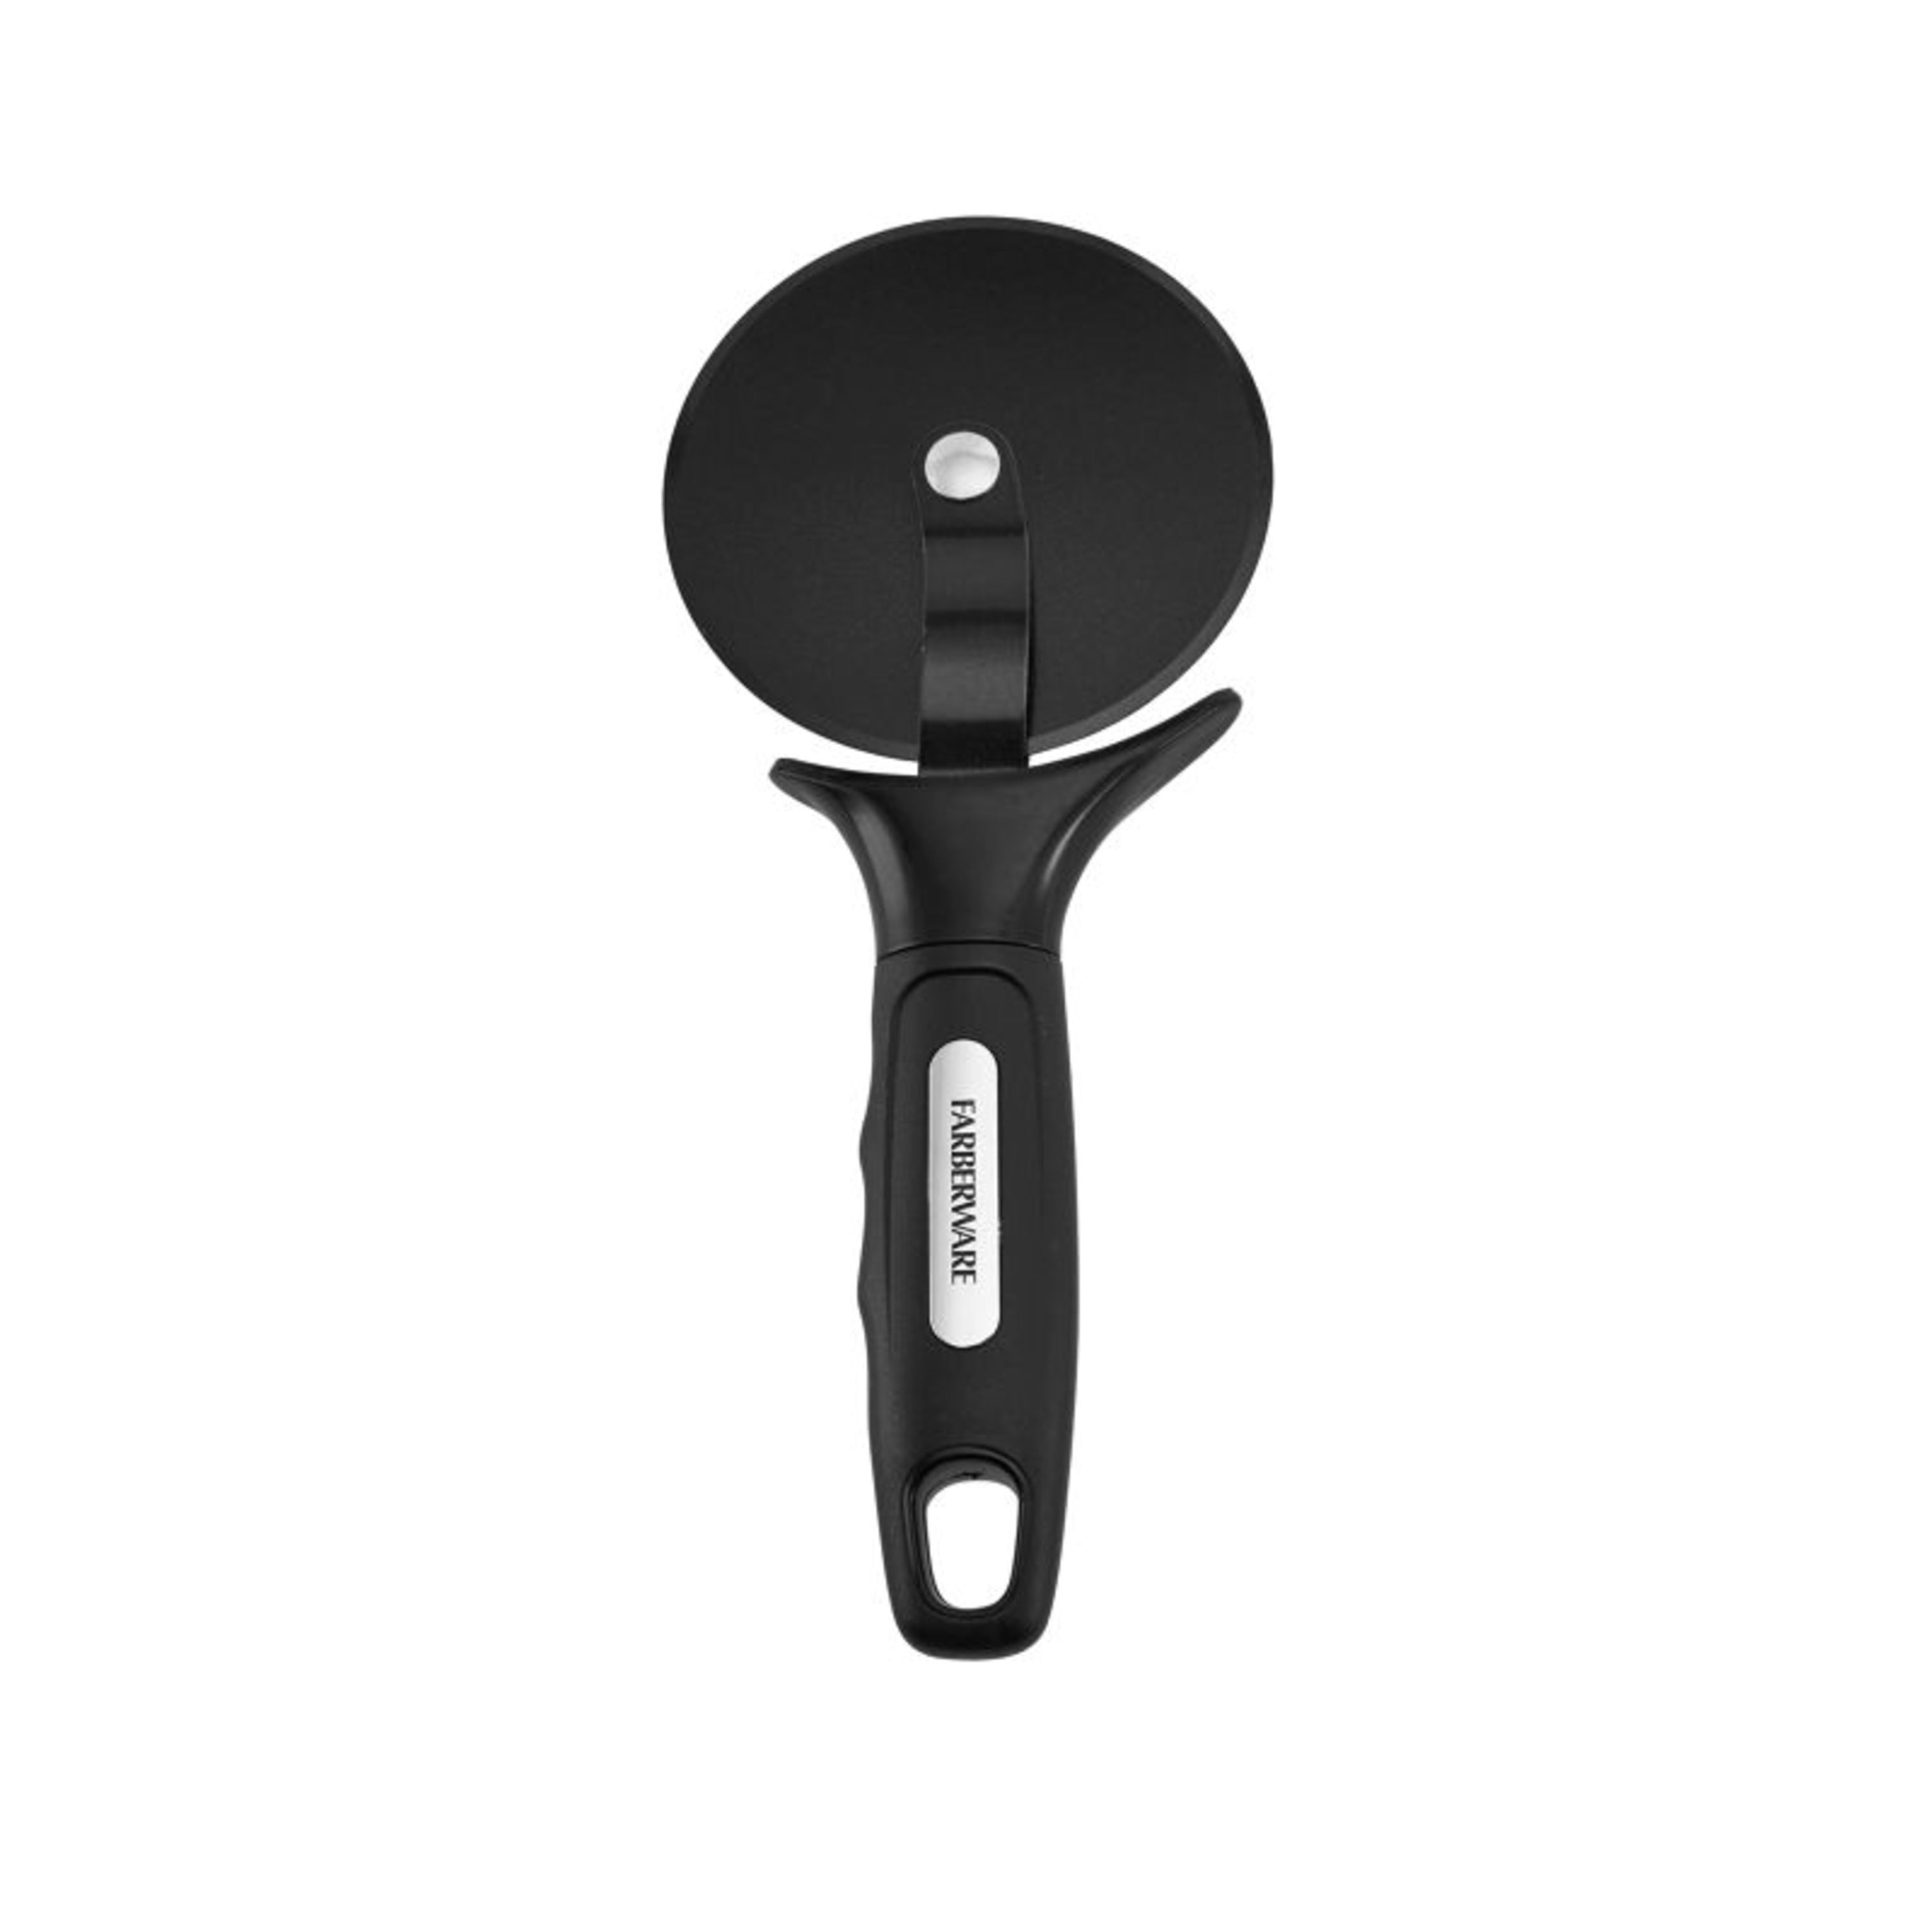 Farberware Professional Pizza Cutter with Black Handle, Size: 16Jar